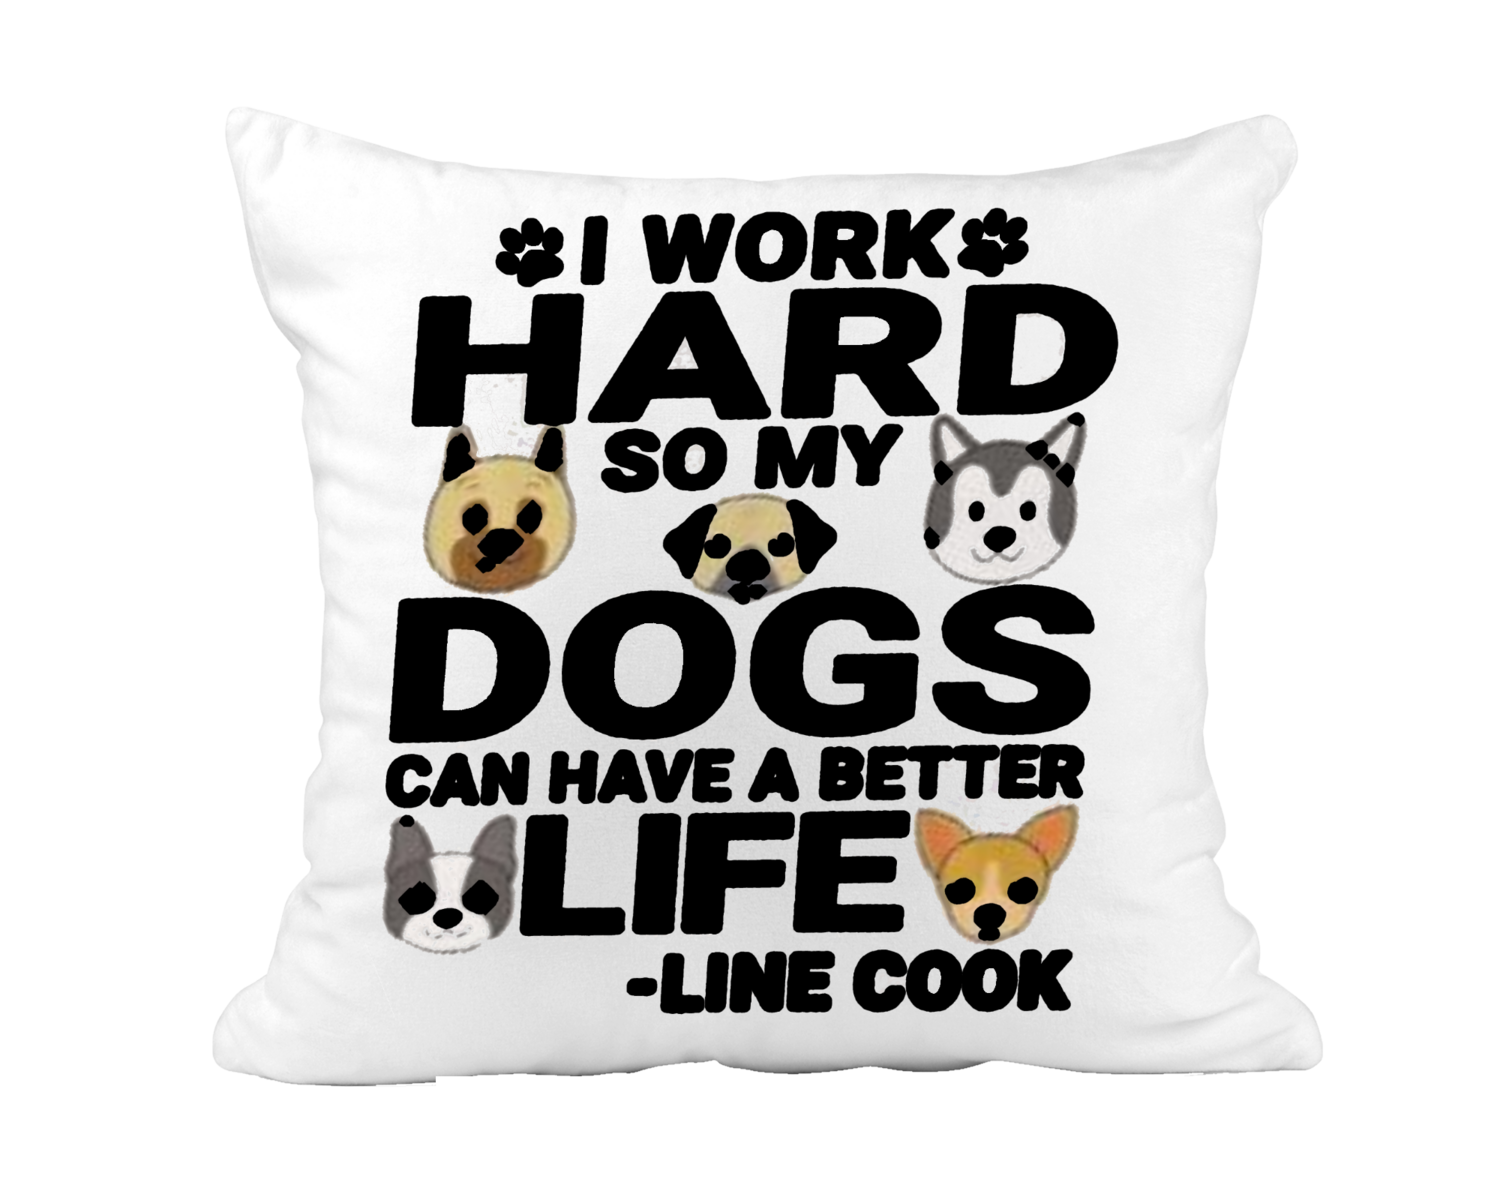 Pillow Suede Dog: I WORK HARD SO MY DOGS CAN HAVE A BETTER LIFE